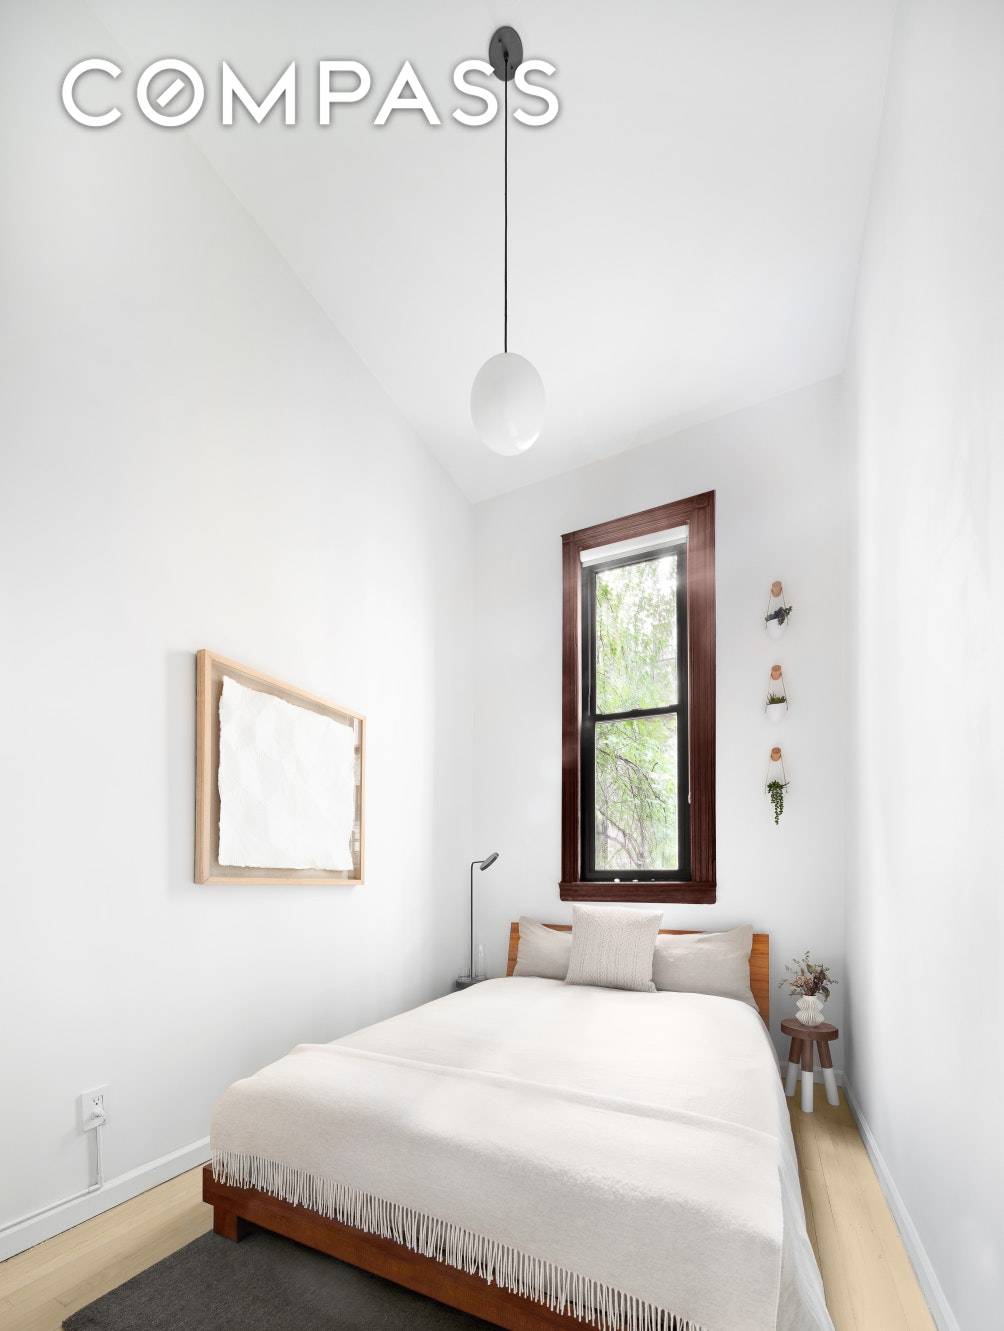 Spectacularly renovated UWS 1BR Brownstone Coop w Sleeping Loft WOW is the only word to describe this completely renovated one bedroom with sleeping loft.